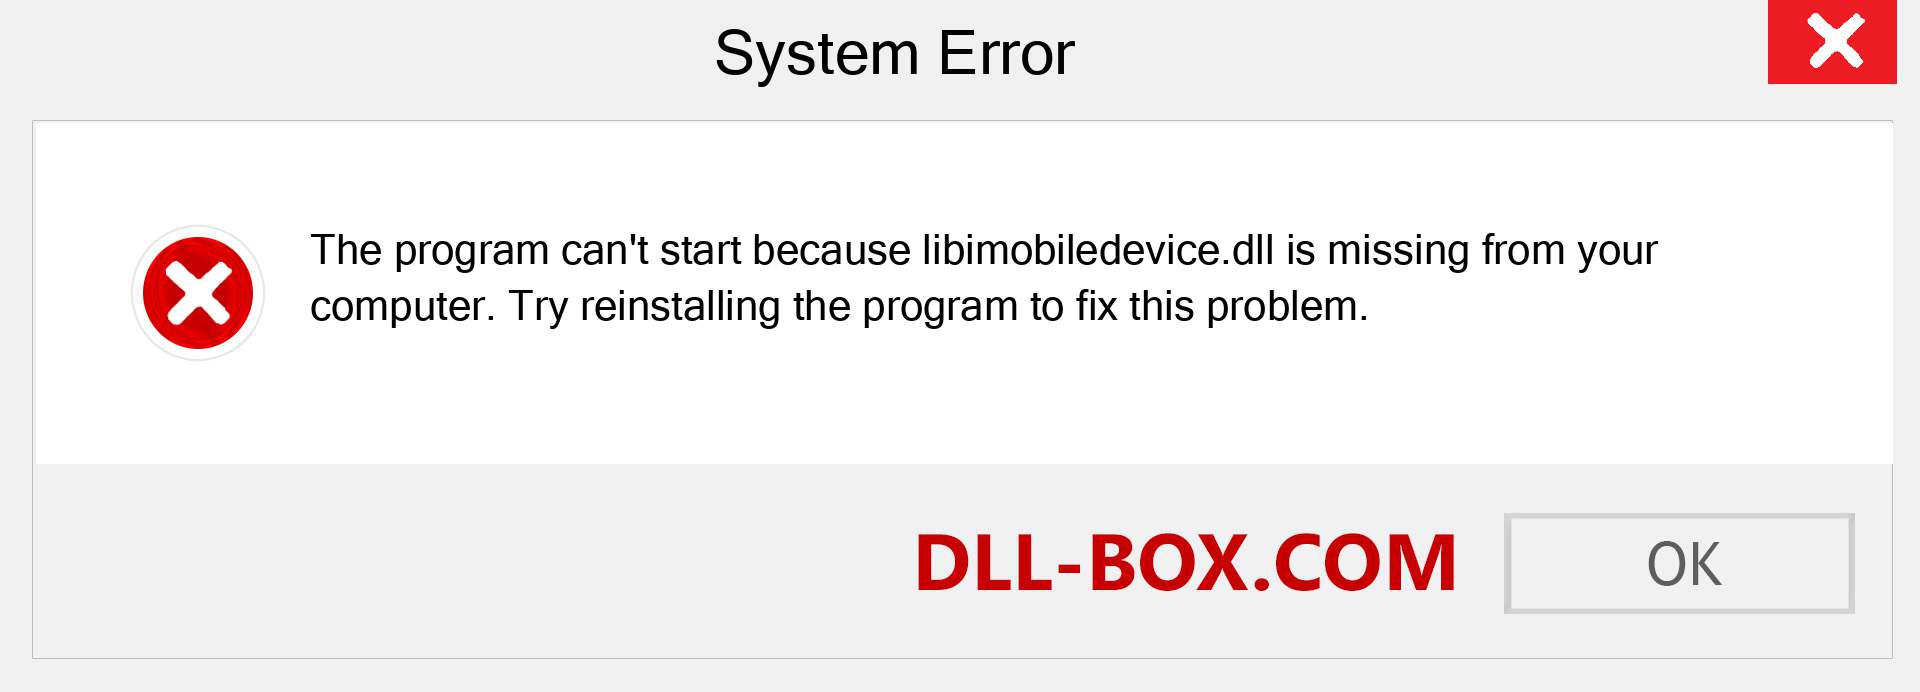  libimobiledevice.dll file is missing?. Download for Windows 7, 8, 10 - Fix  libimobiledevice dll Missing Error on Windows, photos, images